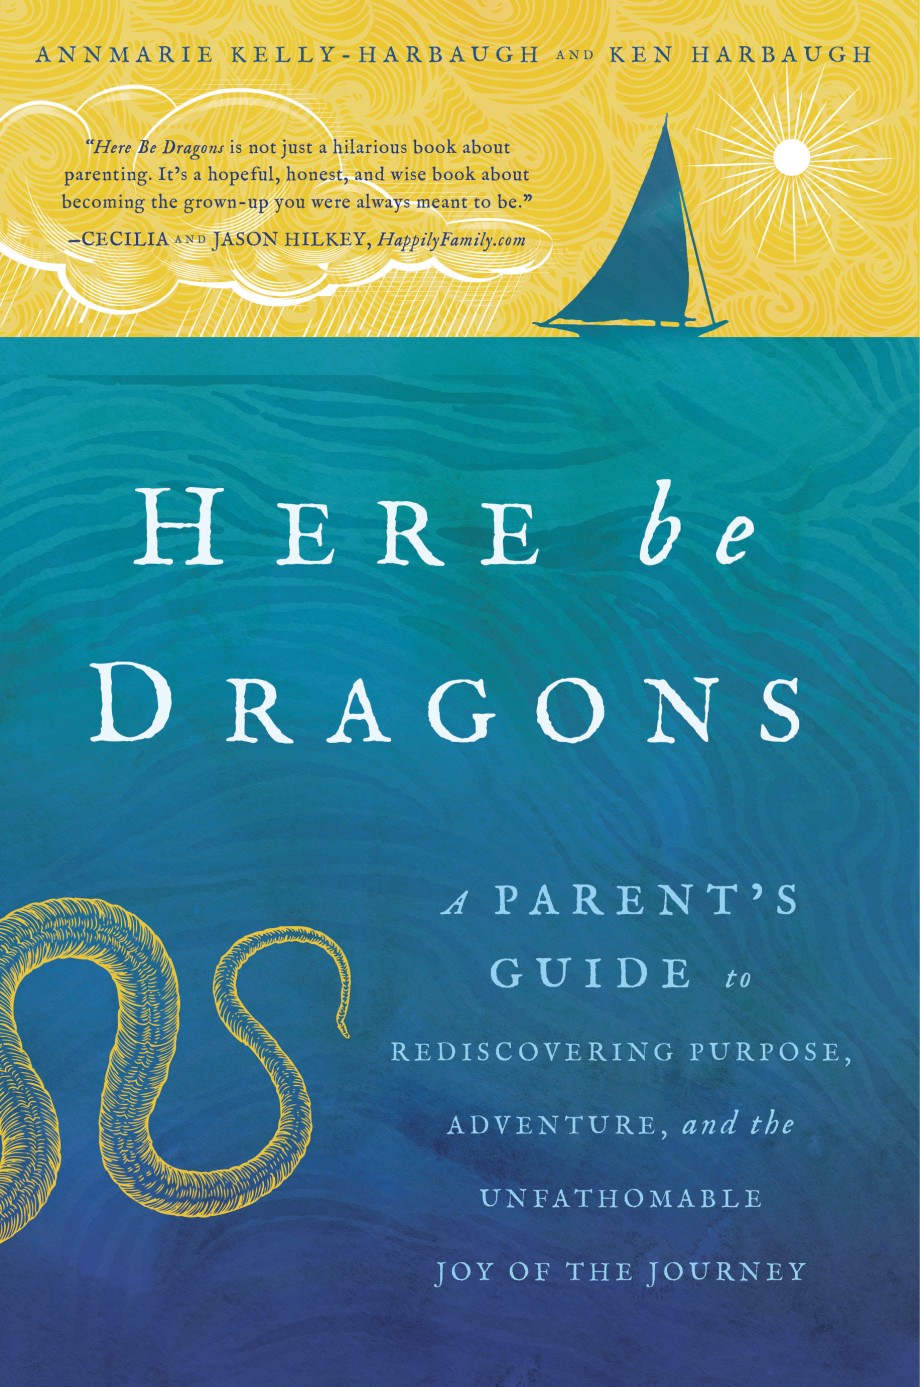 Here Be Dragons A Parent’s Guide to Rediscovering Purpose, Adventure, and the Unfathomable Joy of the Journey